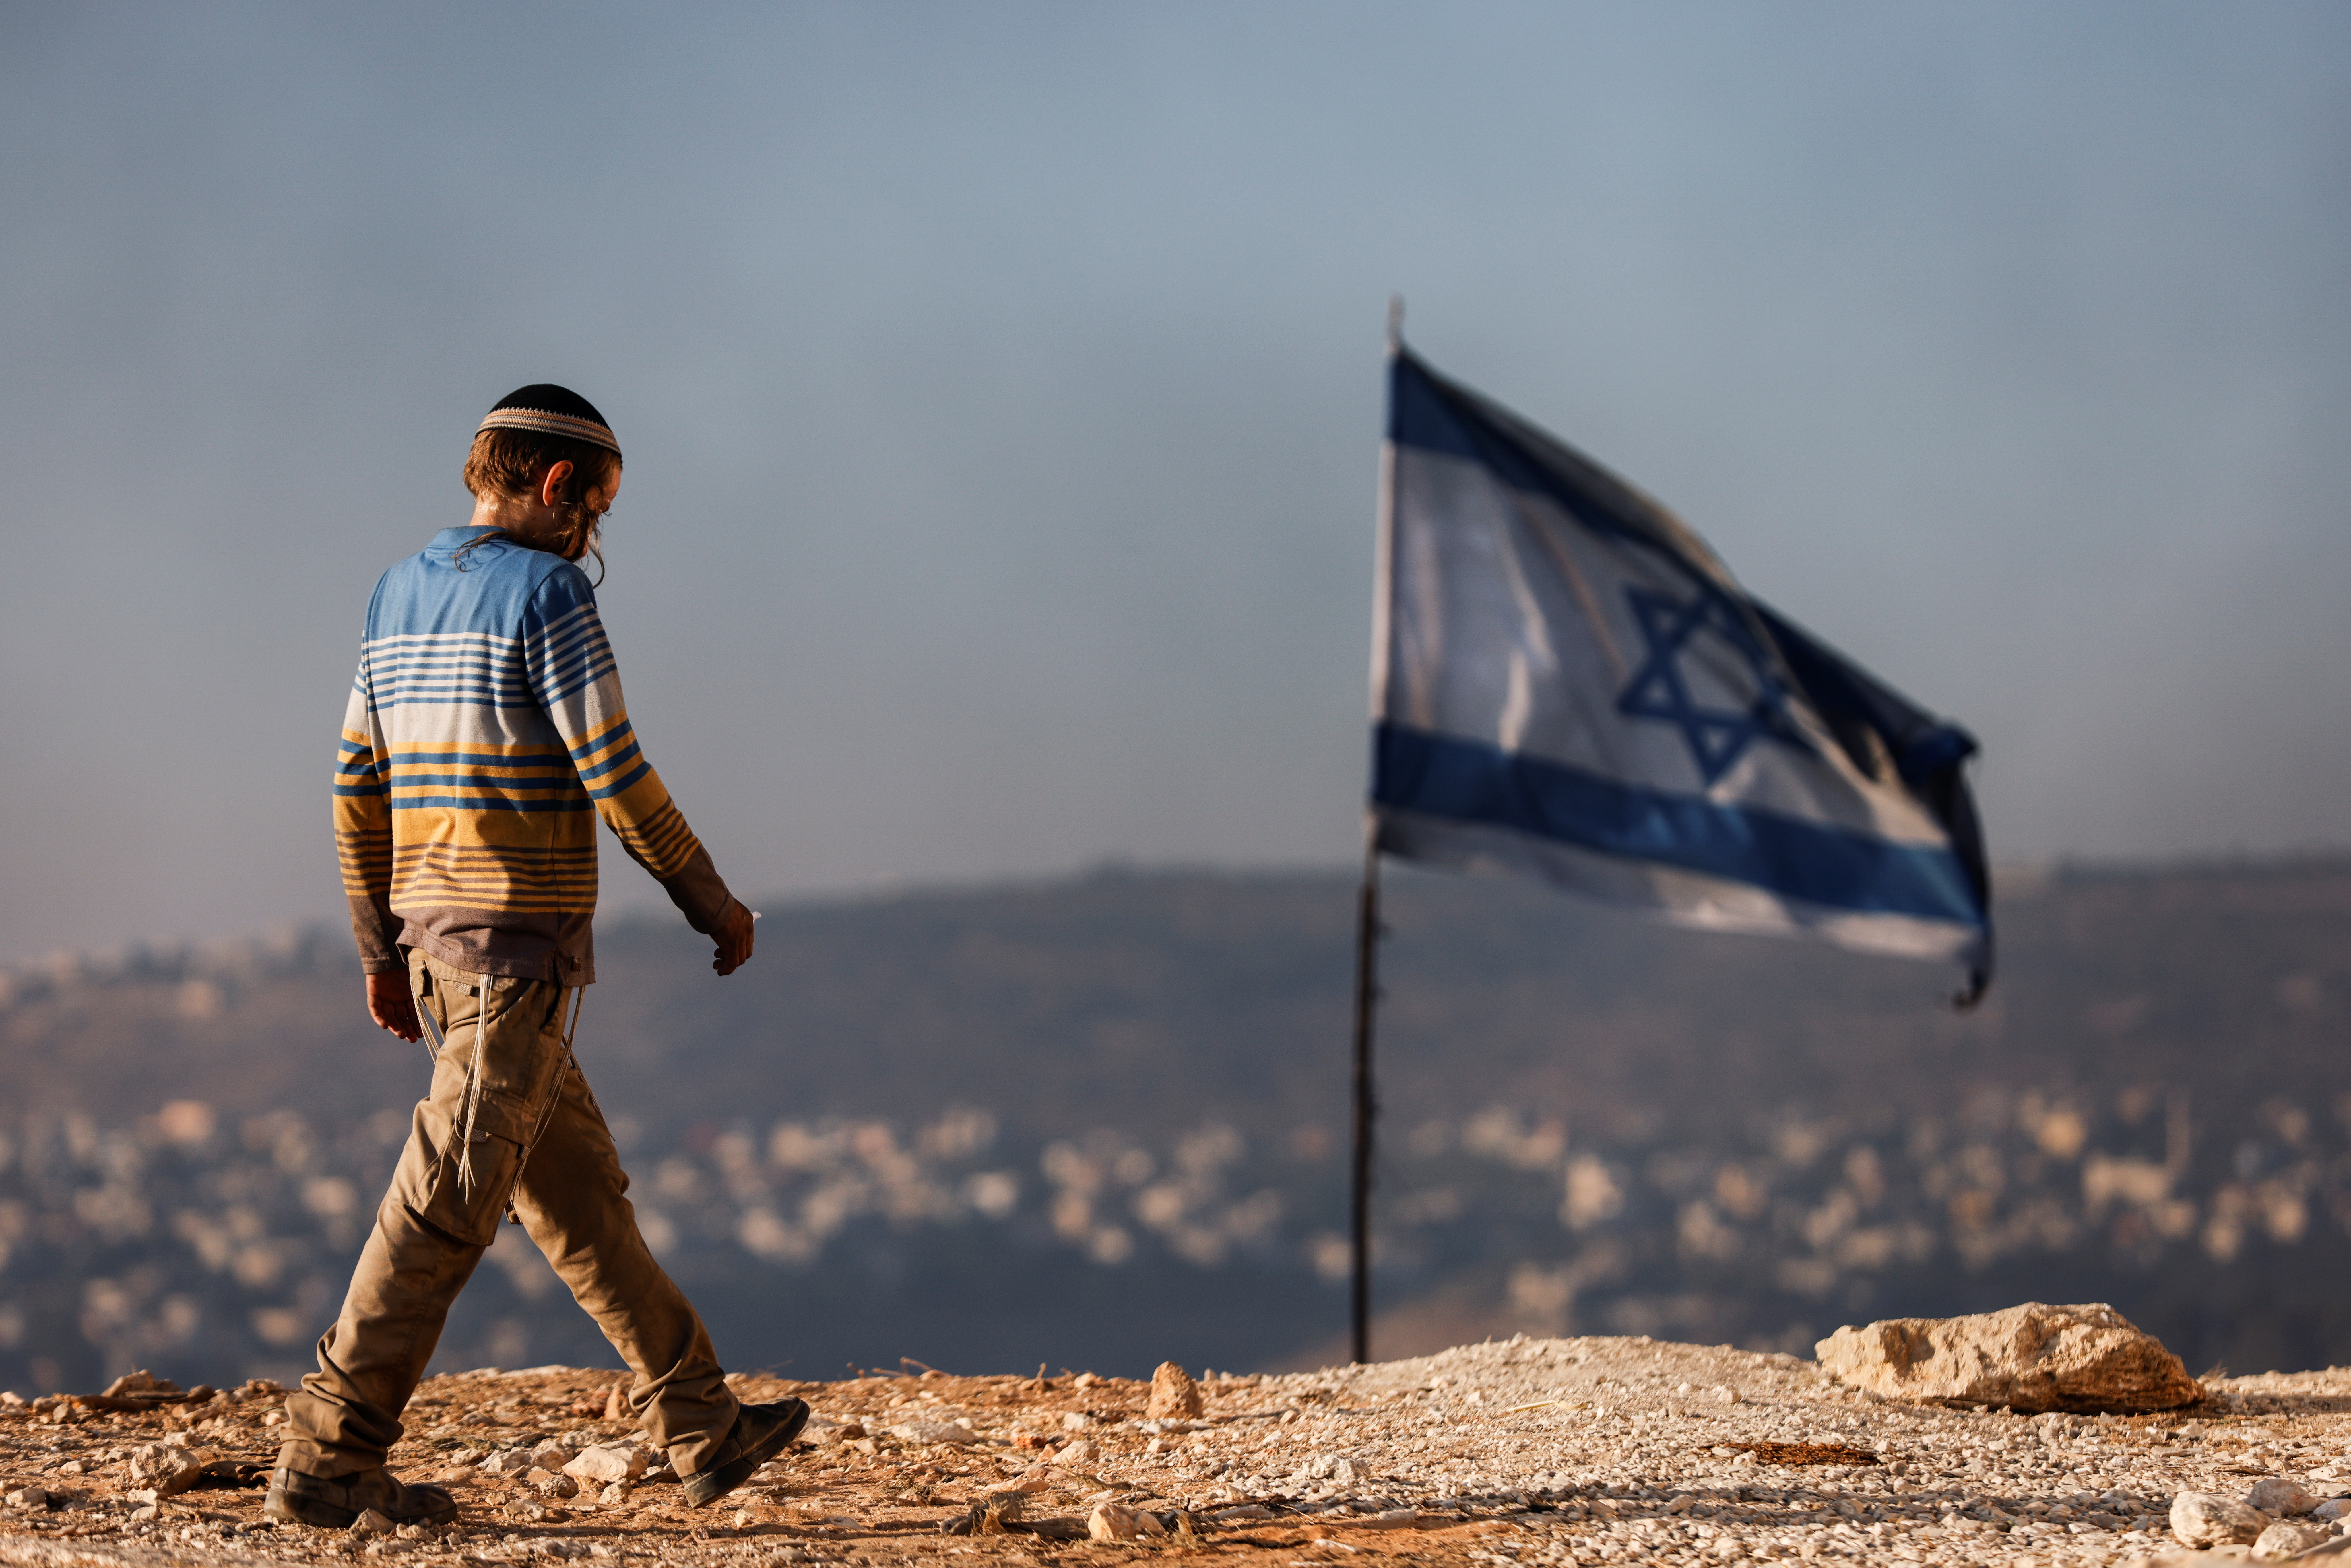 A Jewish settler teenager walks by an Israeli flag in Givat Eviatar, a new Israeli settler outpost, near the Palestinian village of Beita in the Israeli-occupied West Bank